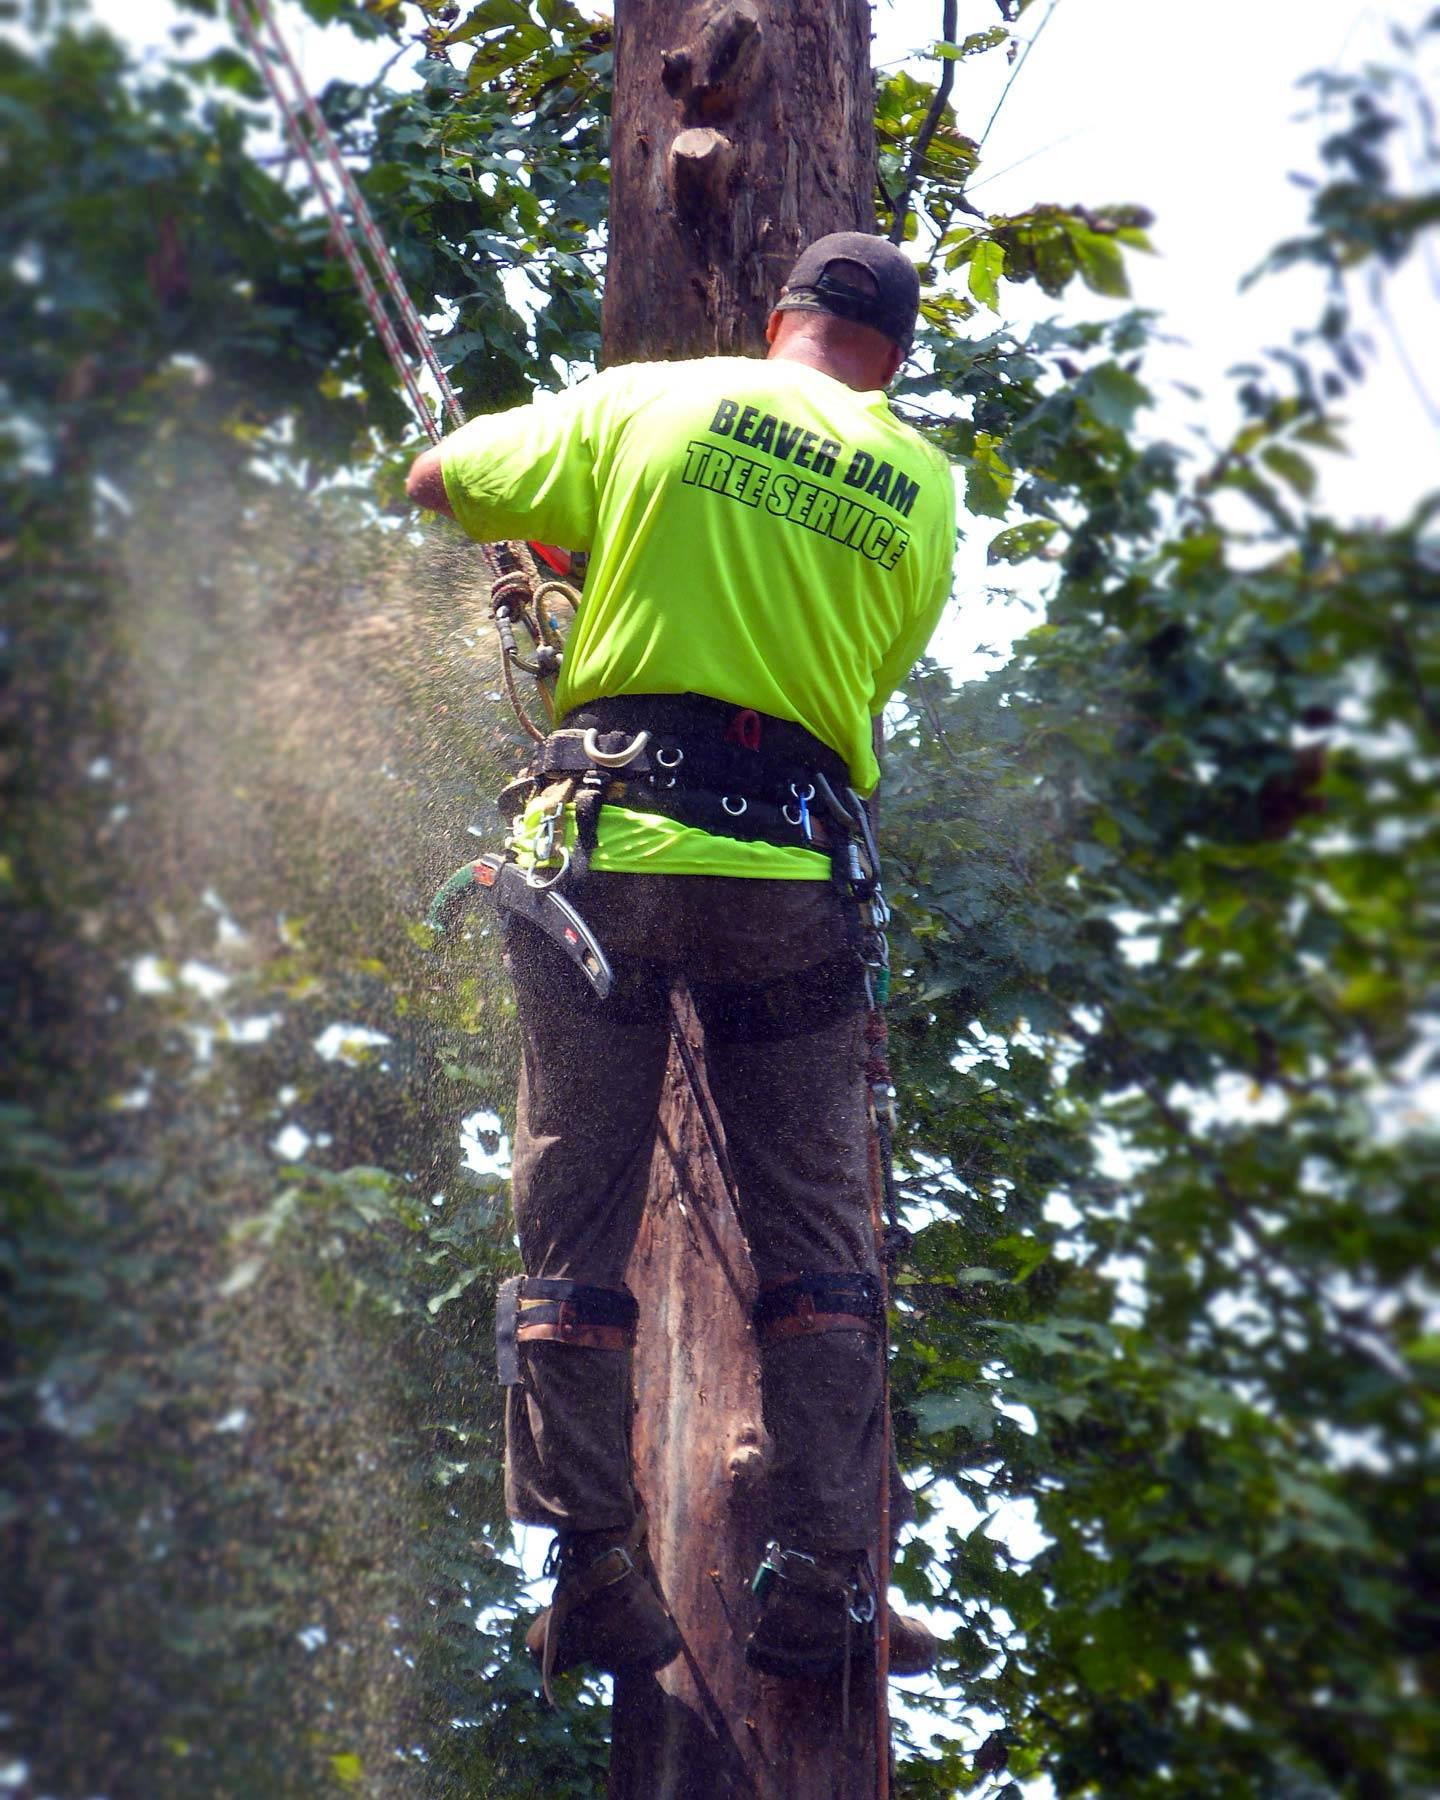 Beaver Dam Tree Service employee using a chainsaw to remove branches from a tall tree.